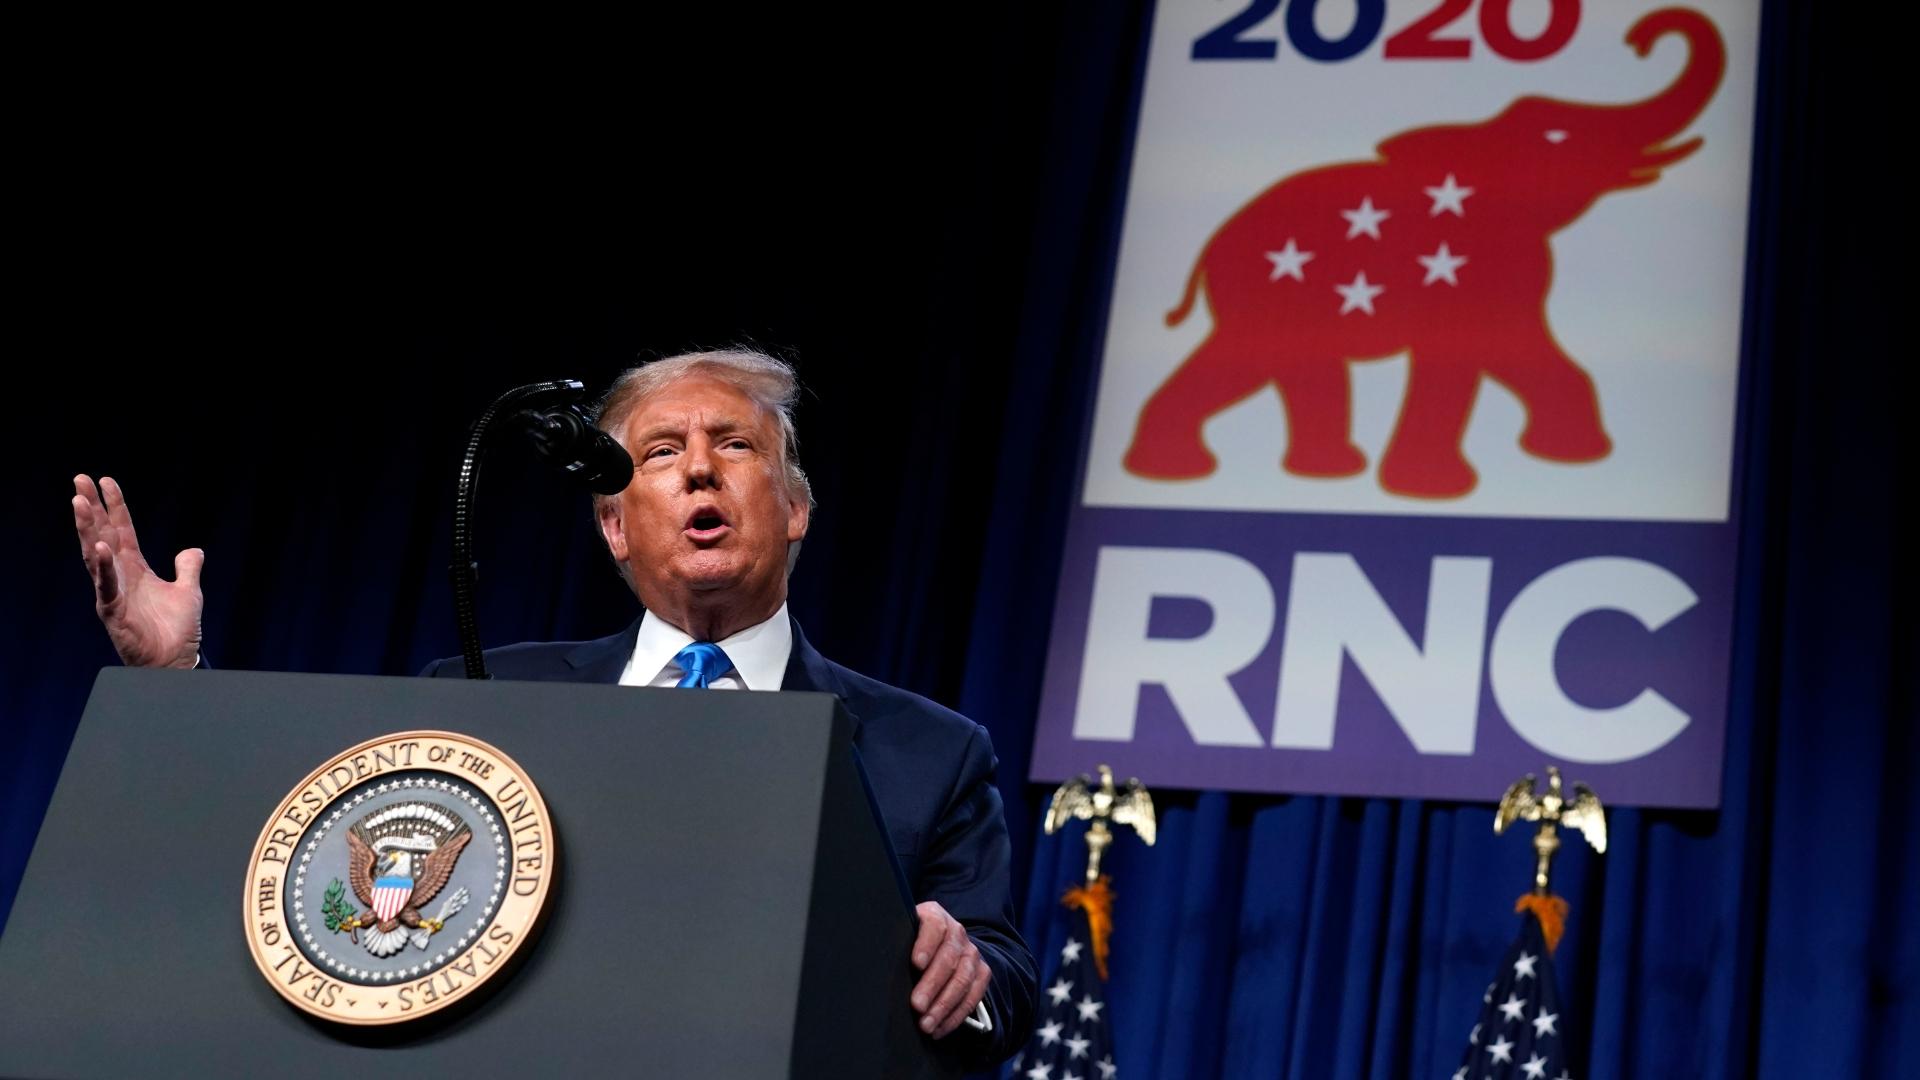 President Donald Trump speaks on stage during the first day of the Republican National Committee convention, Monday, Aug. 24, 2020, in Charlotte. (AP Photo / Evan Vucci)